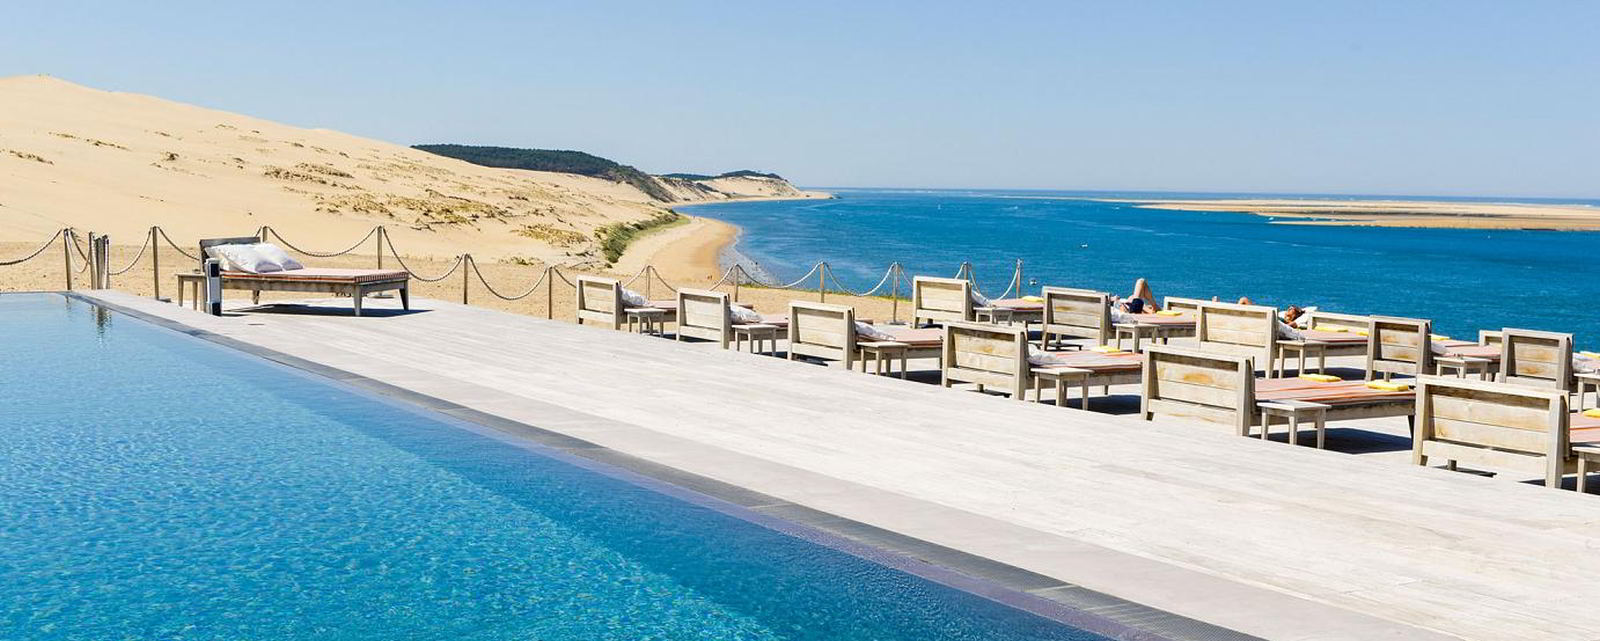 Luxury Bespoke Beach Holidays in France with In Luxe Travel France, the France Luxury Travel Specialist